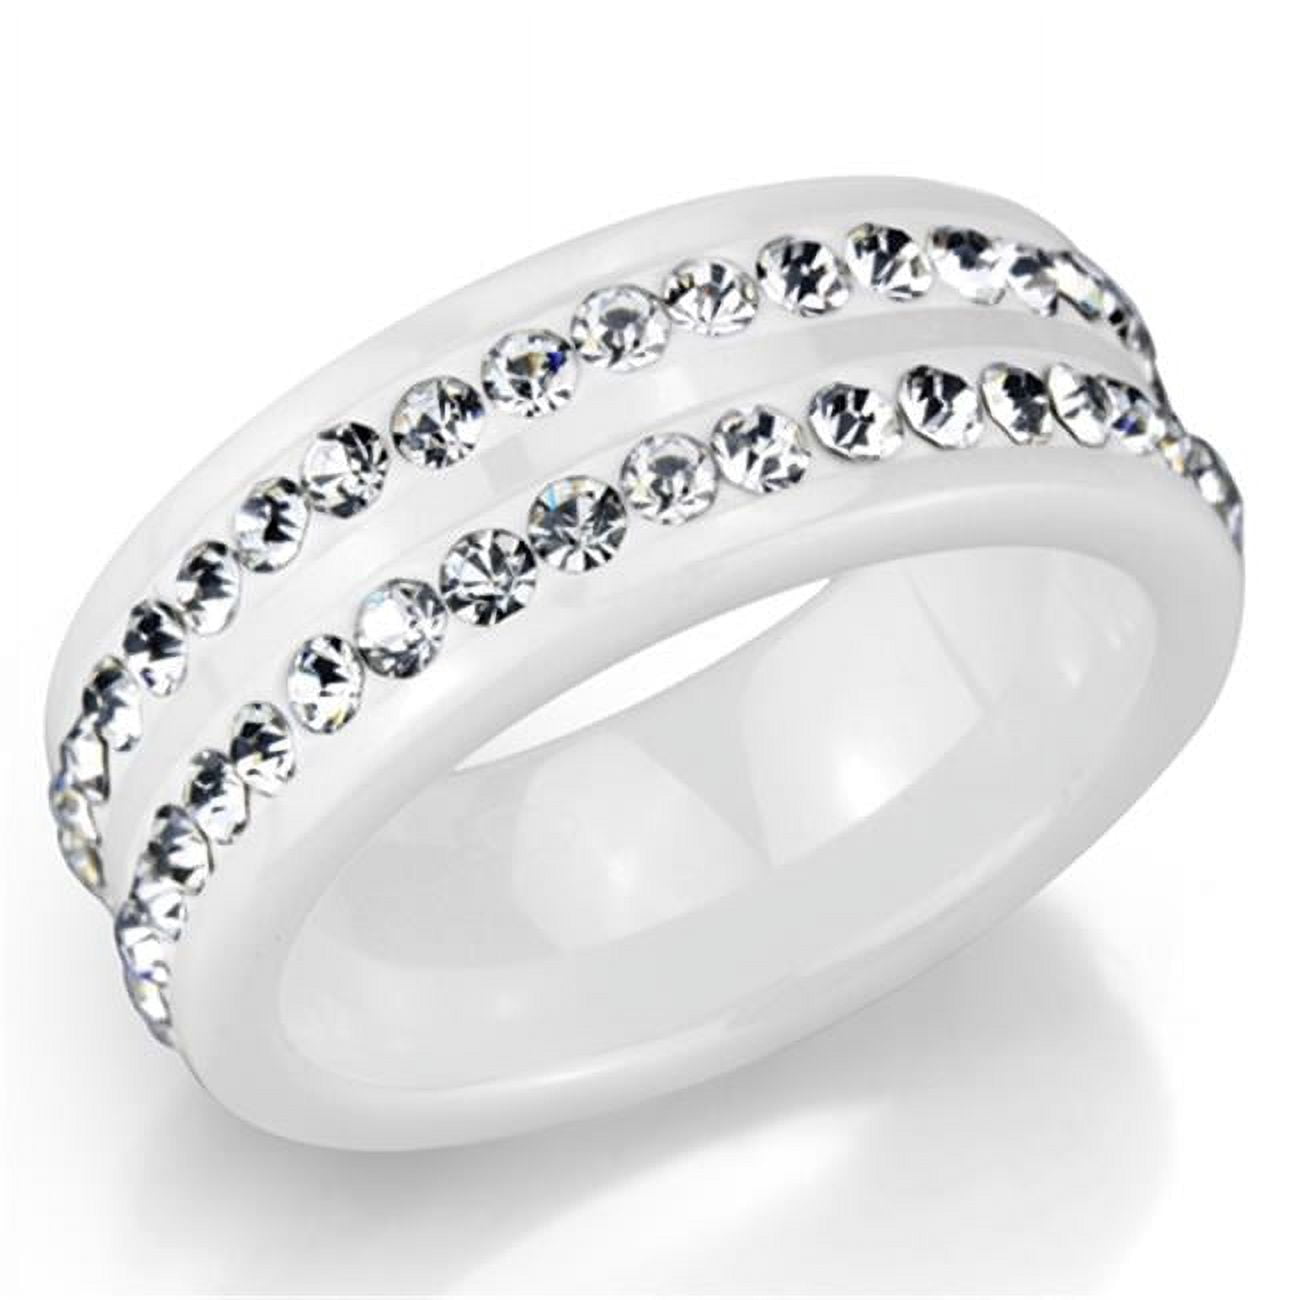 Picture of Alamode 3W970-8 Women High Polished Stainless Steel Ring with Ceramic in White - Size 8